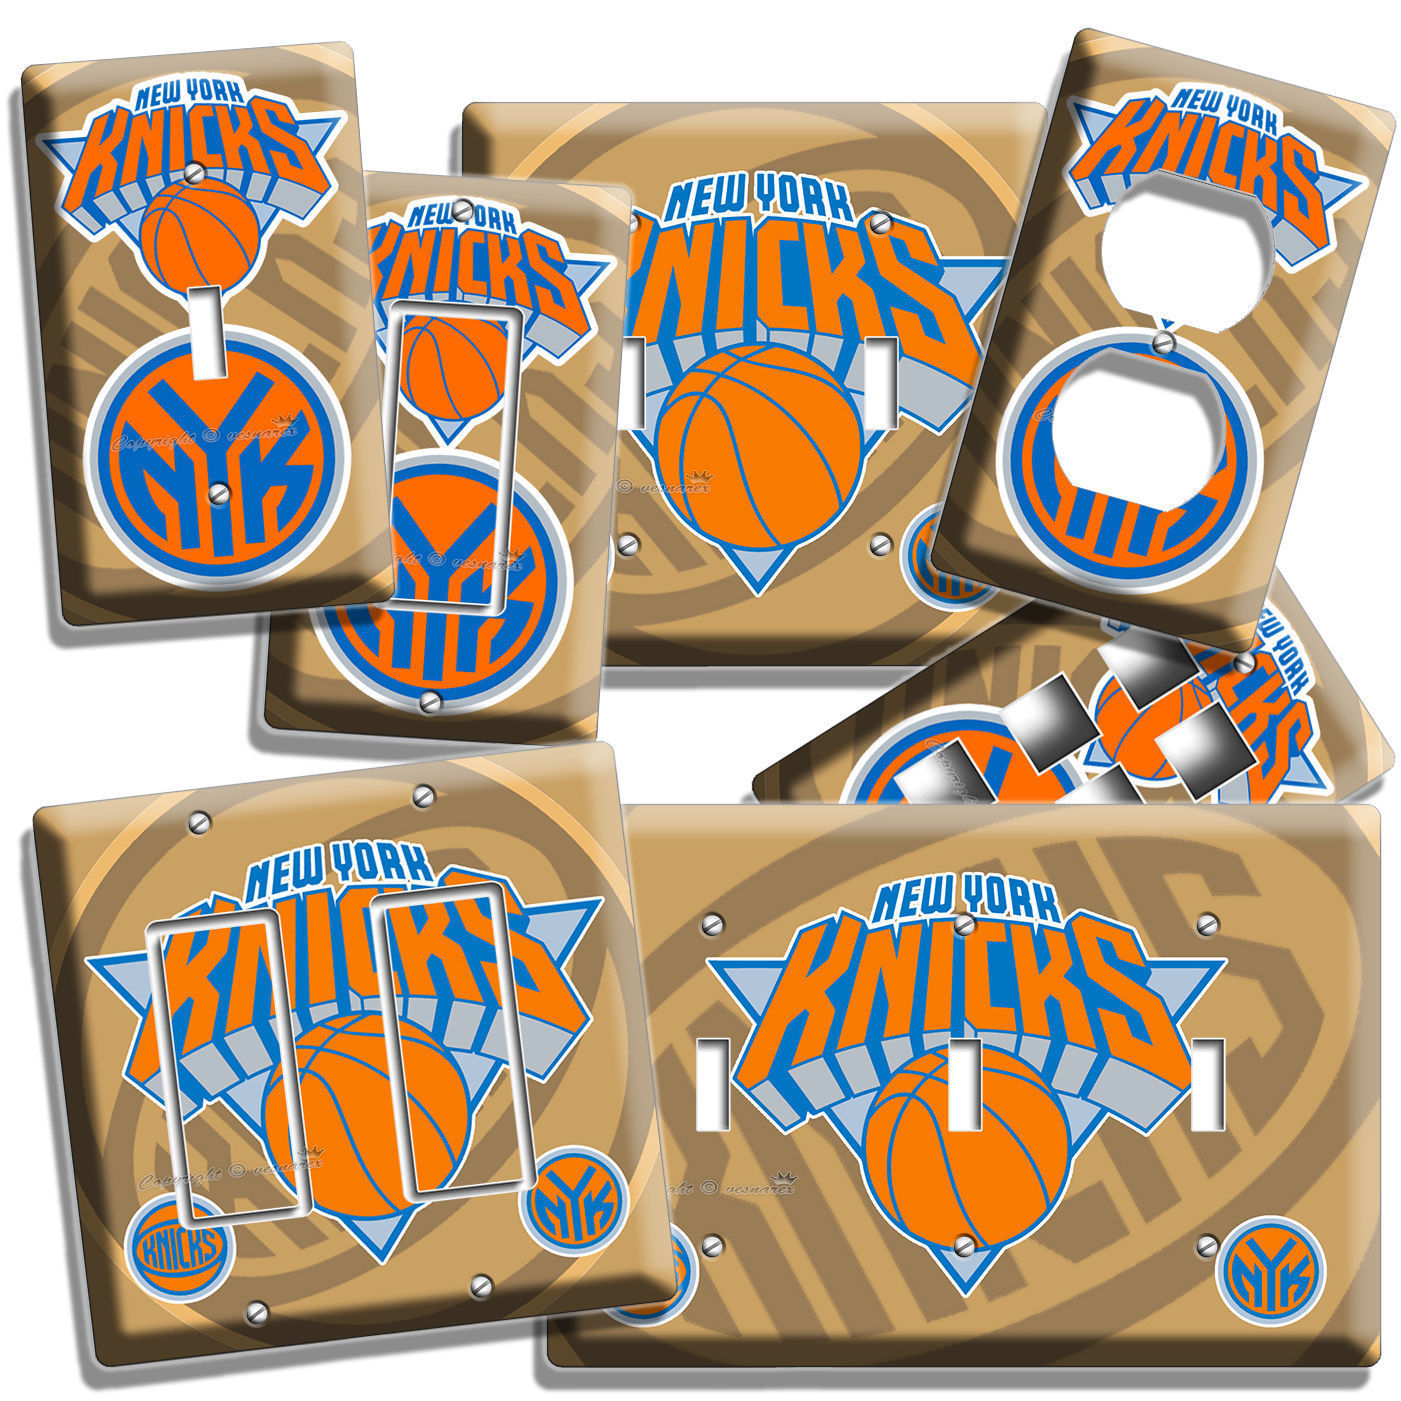 NYK NEW YORK KNICKS BASKETBALL NY TEAM LOGO LIGHT SWITCH OUTLET WALL PLATE COVER